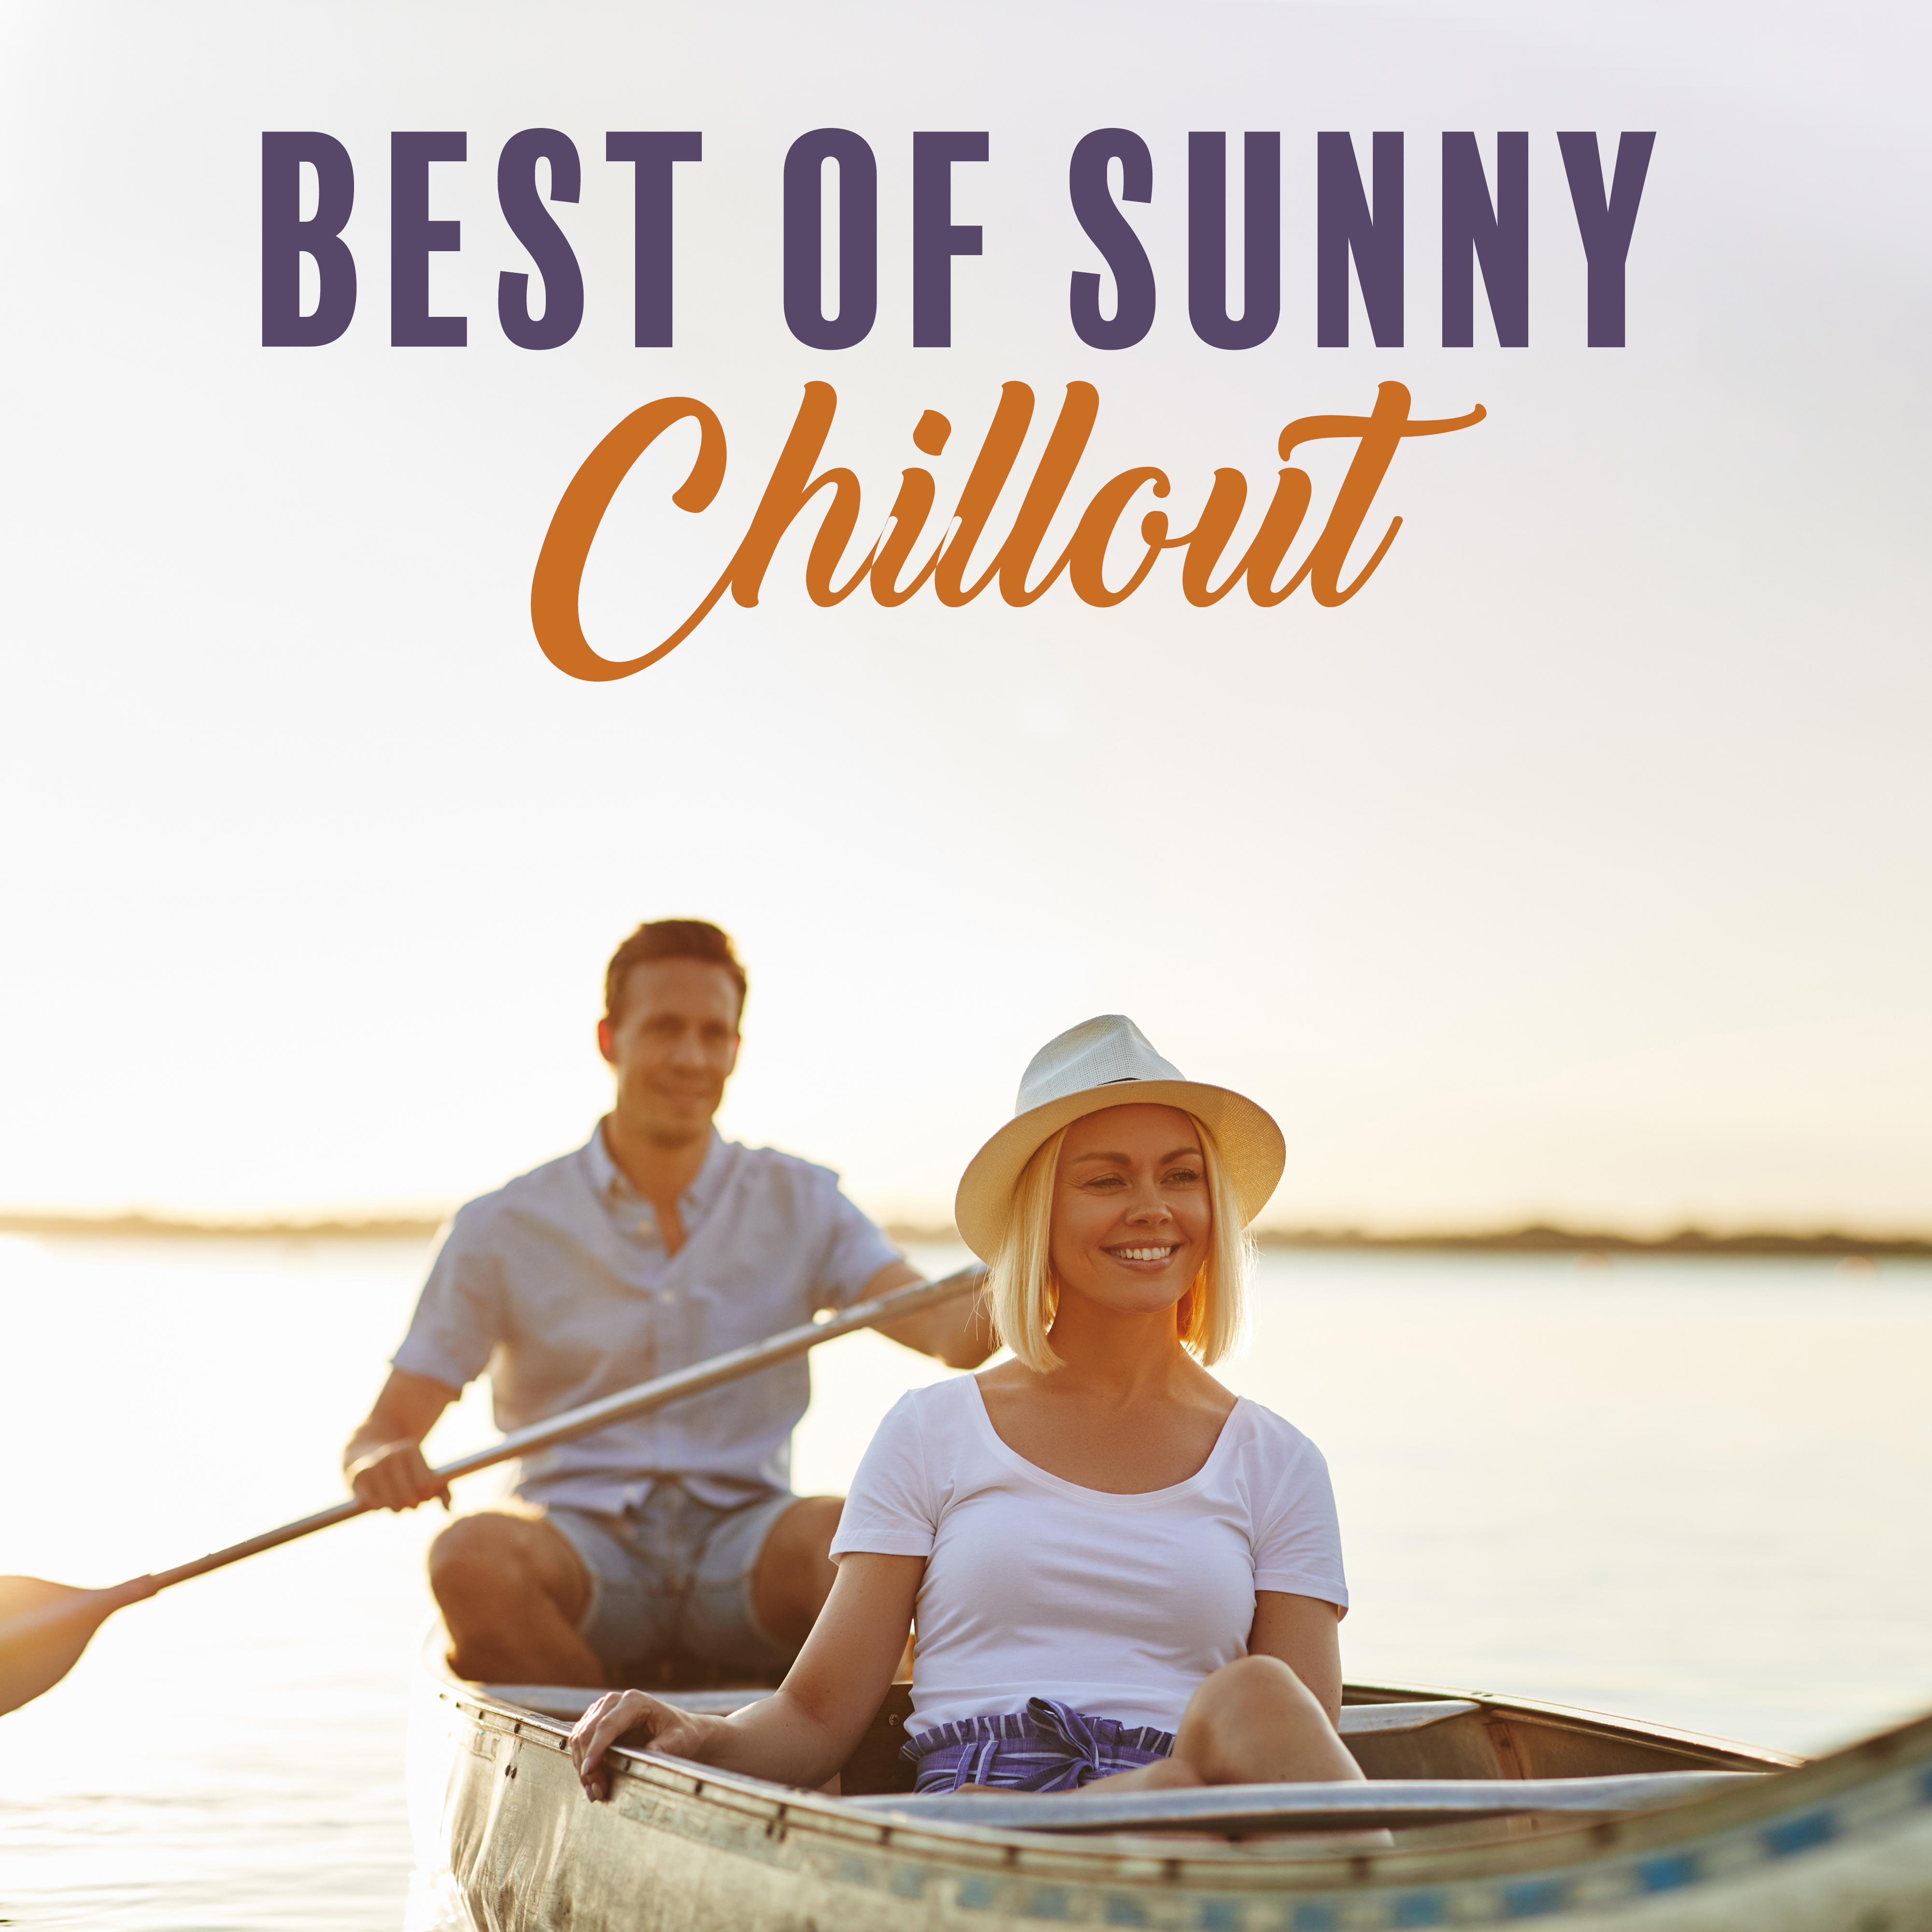 Best of Sunny Chillout: Music for Your Comfort, Convenience, Relaxation and Rest